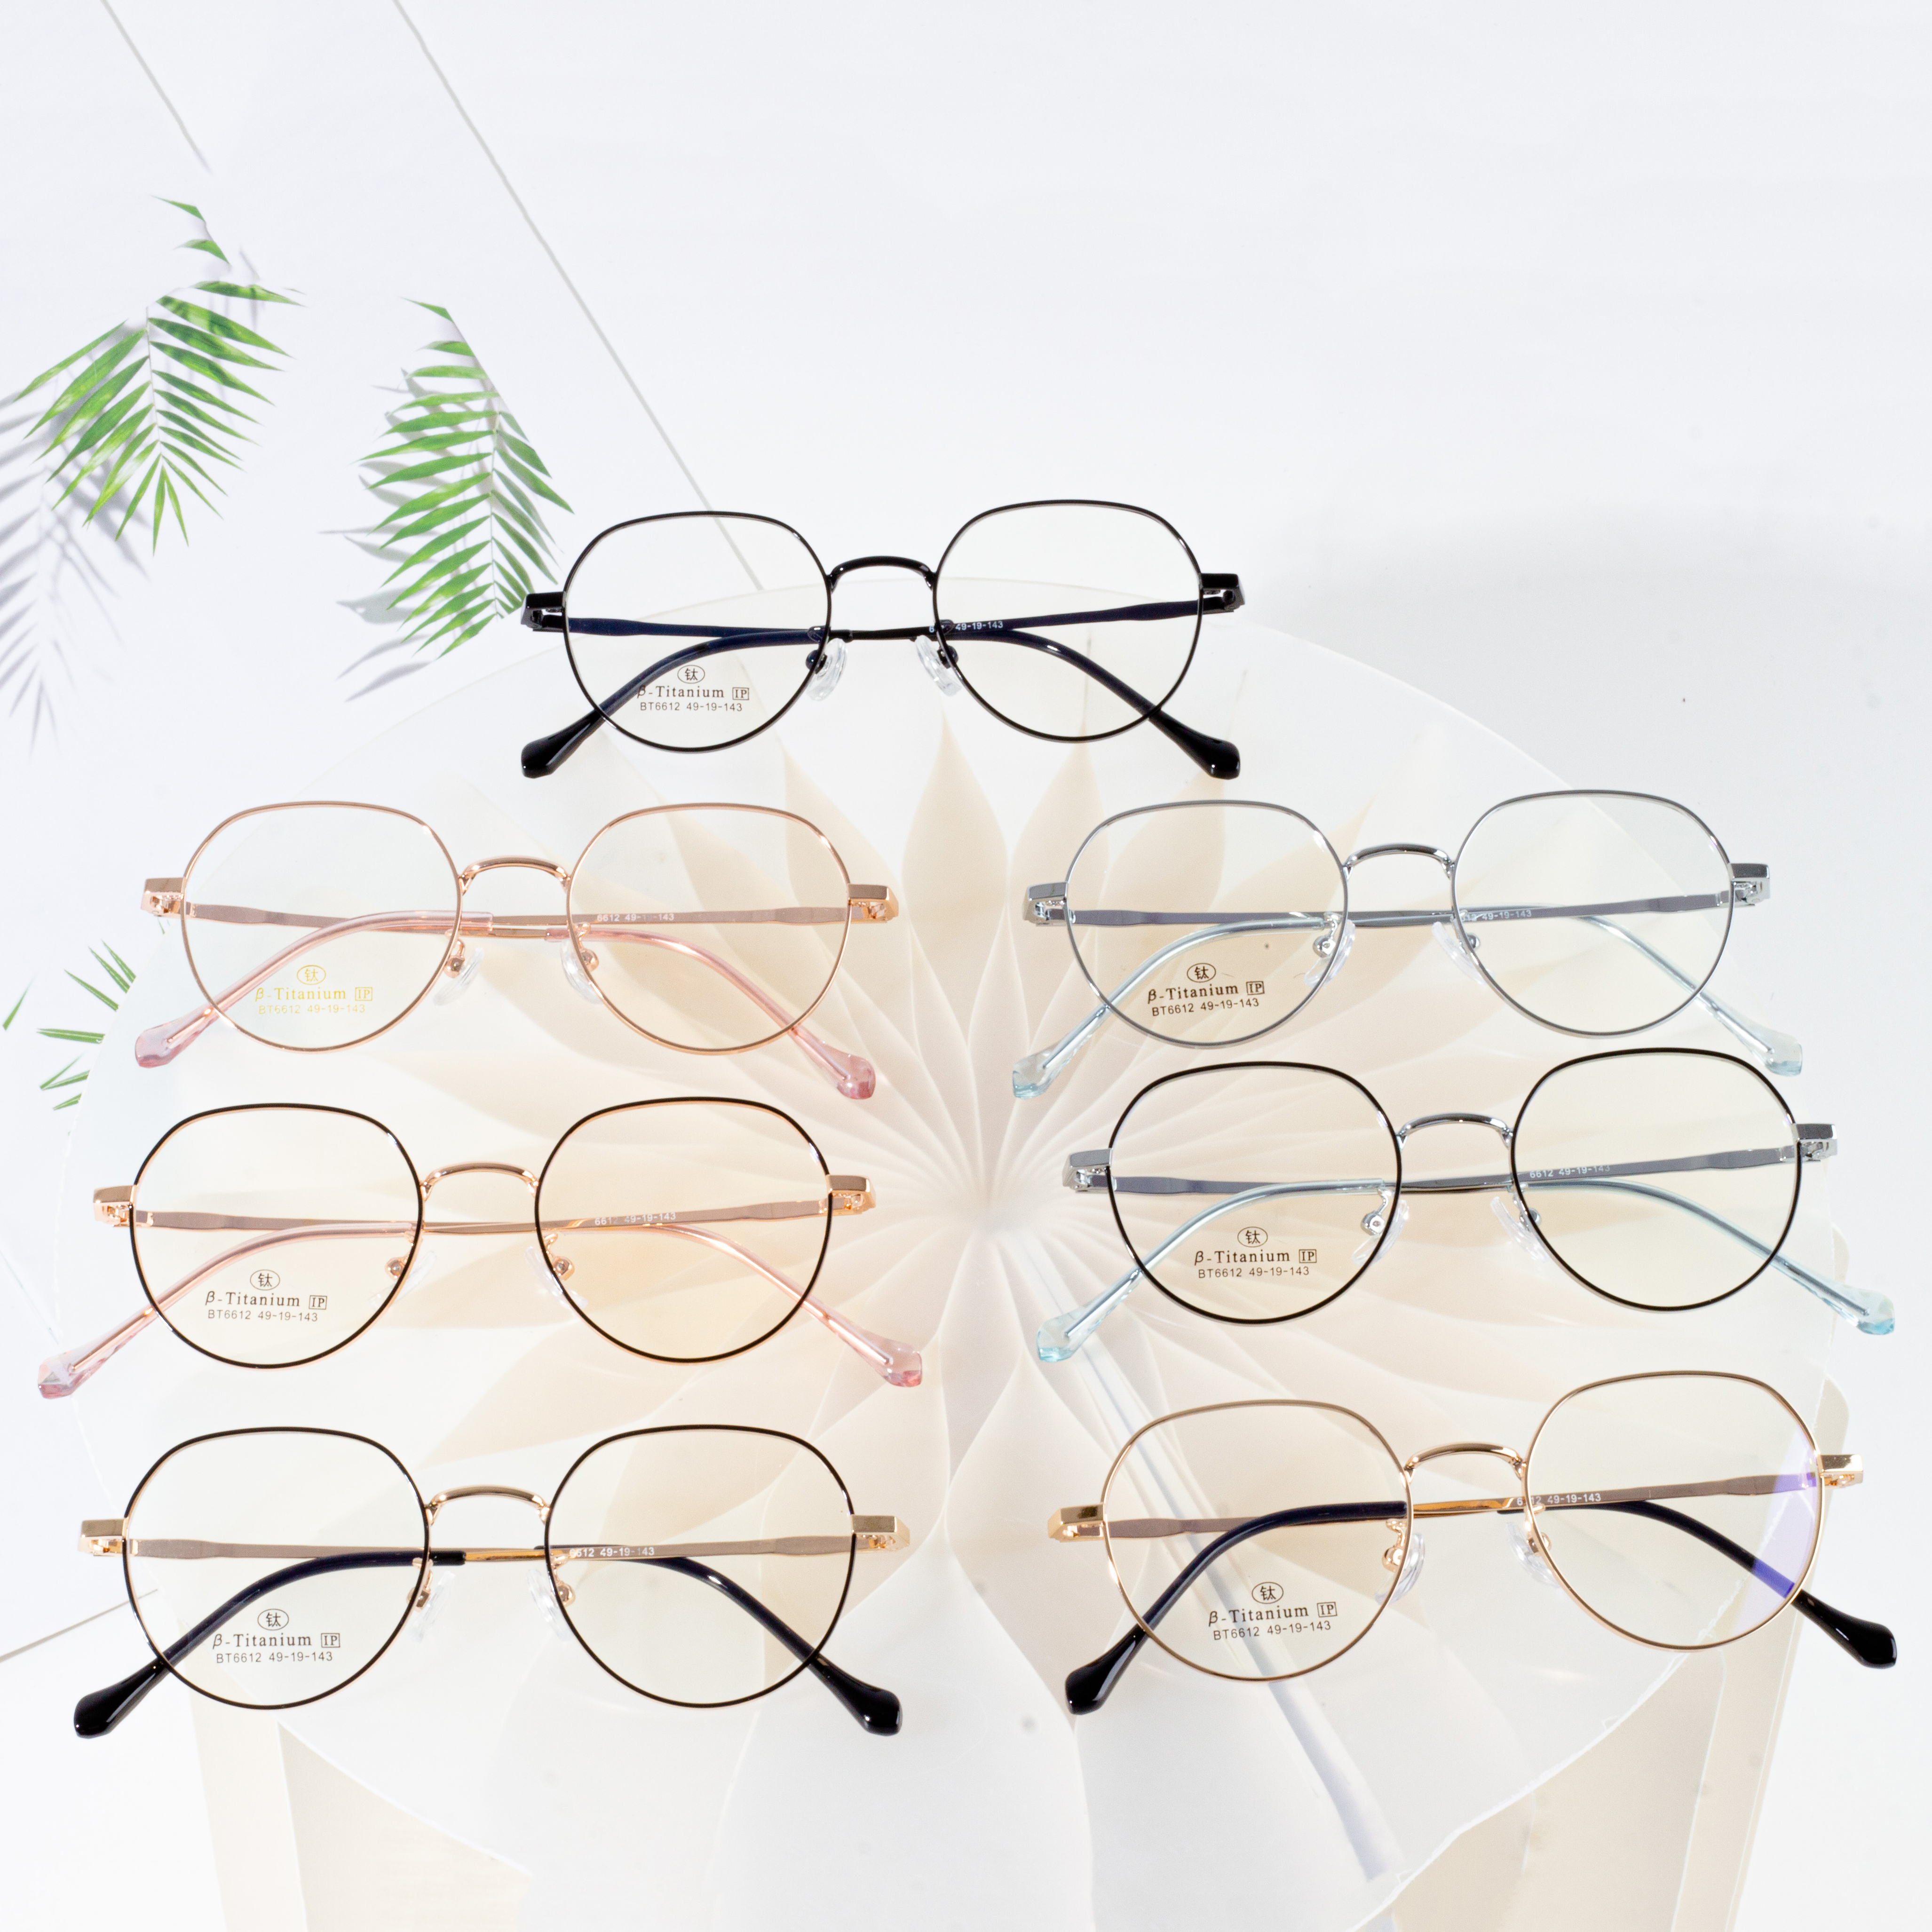 optical frame good quality glasses for men and women metal round glasses